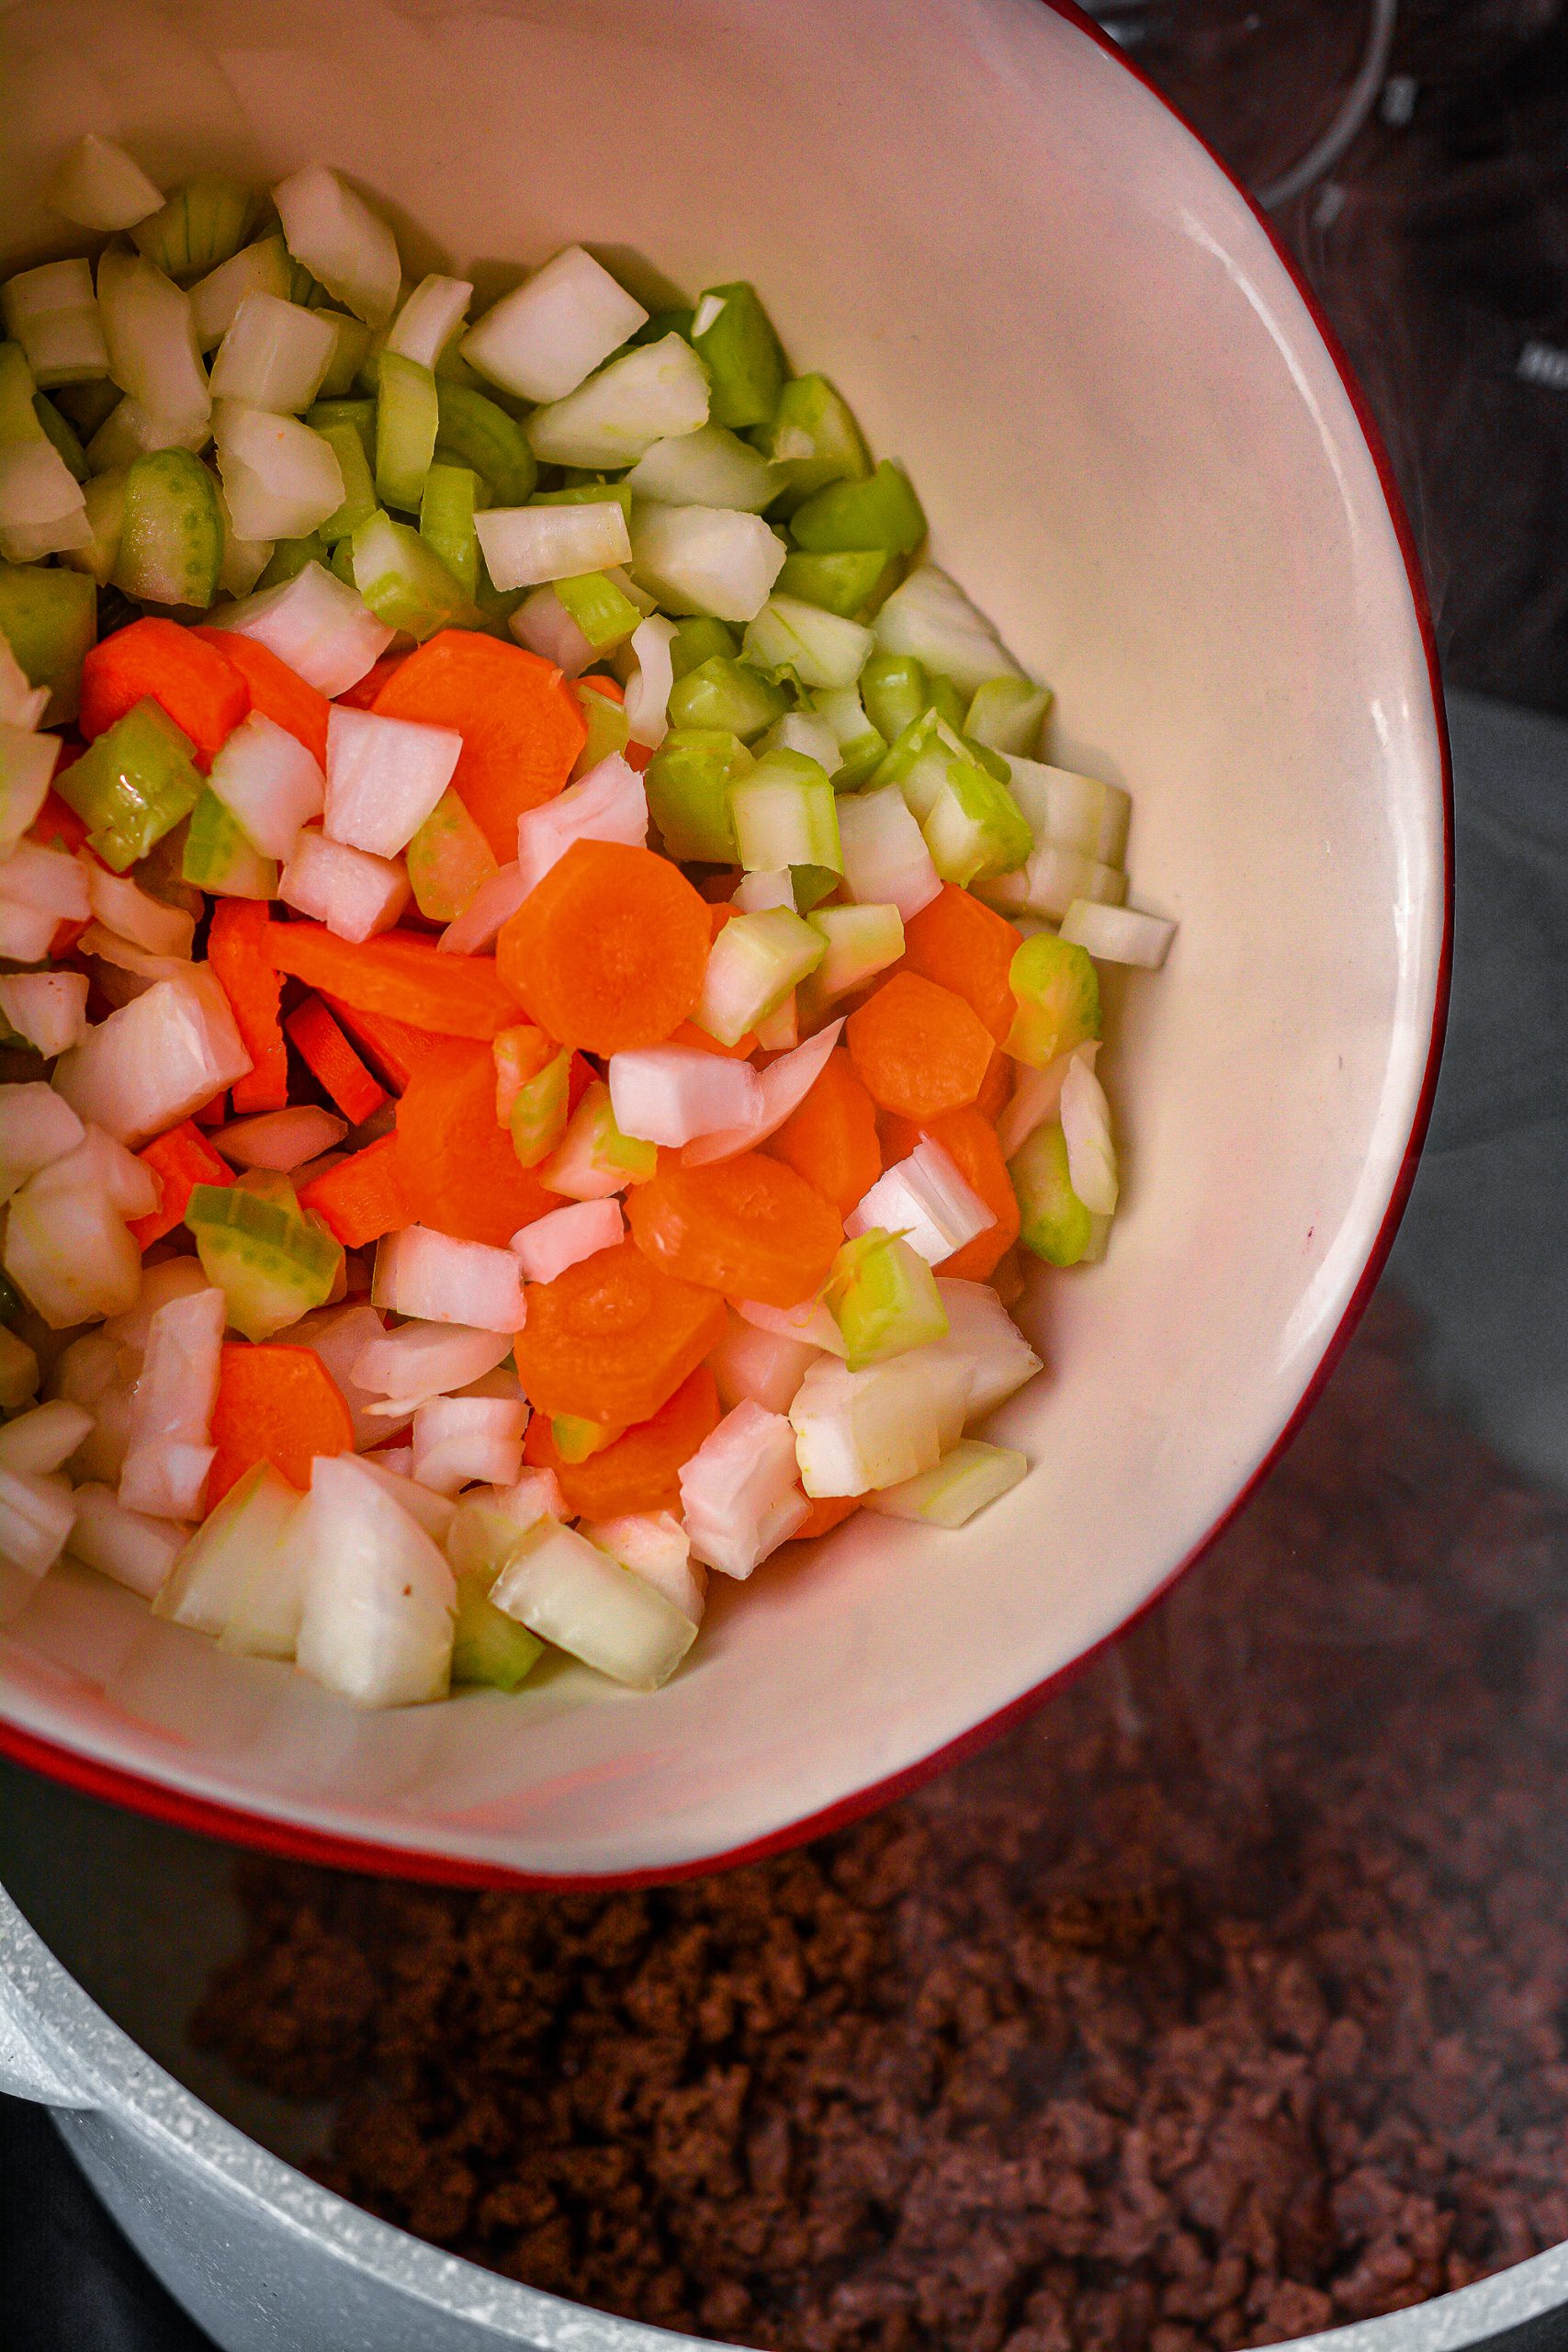 Add carrots, celery, and onions, all chopped.